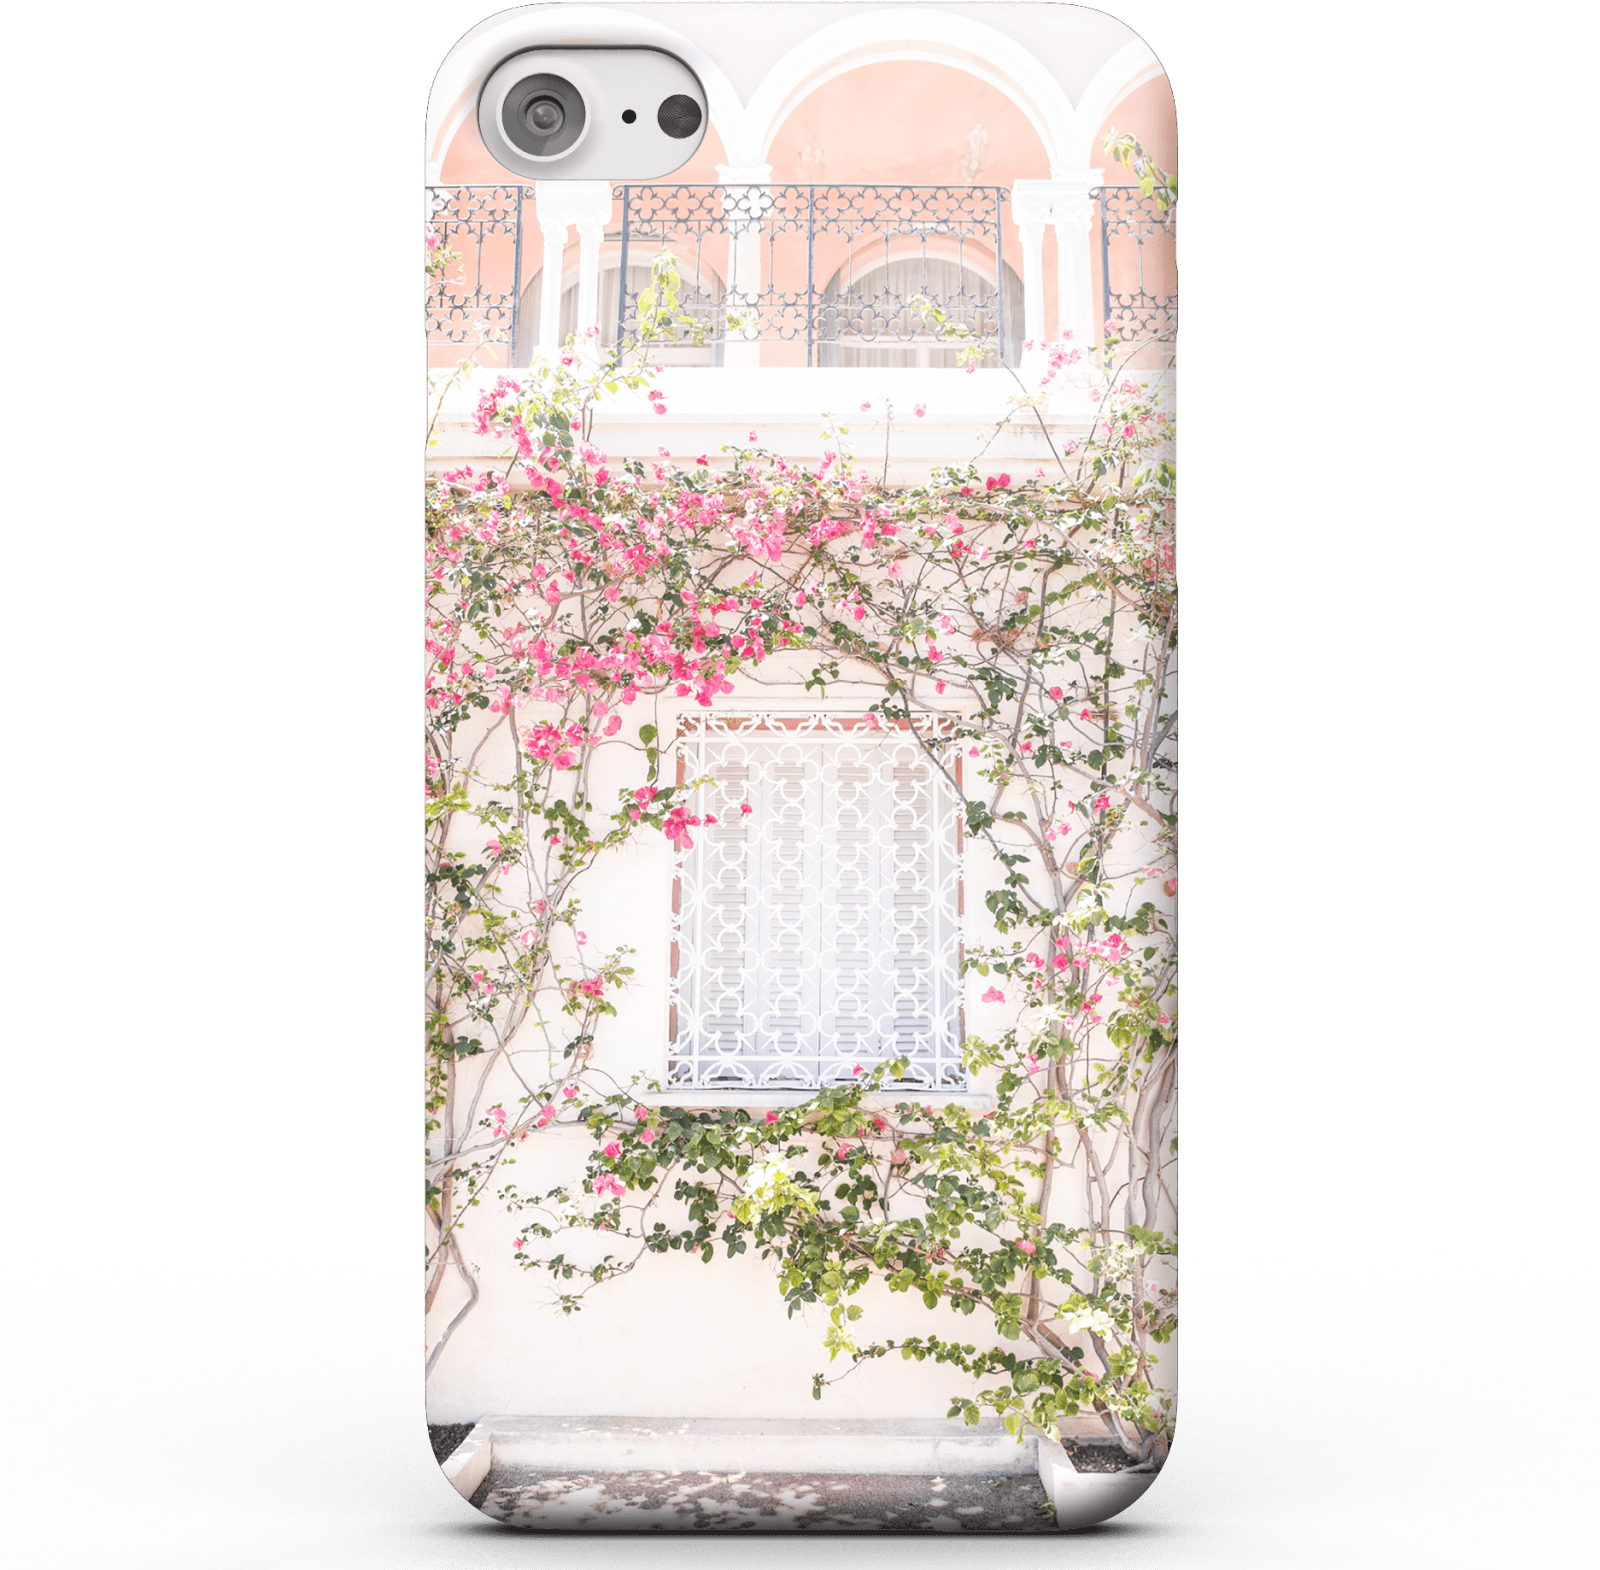 Summer Garden Phone Case for iPhone and Android - iPhone 5/5s - Snap Case - Matte